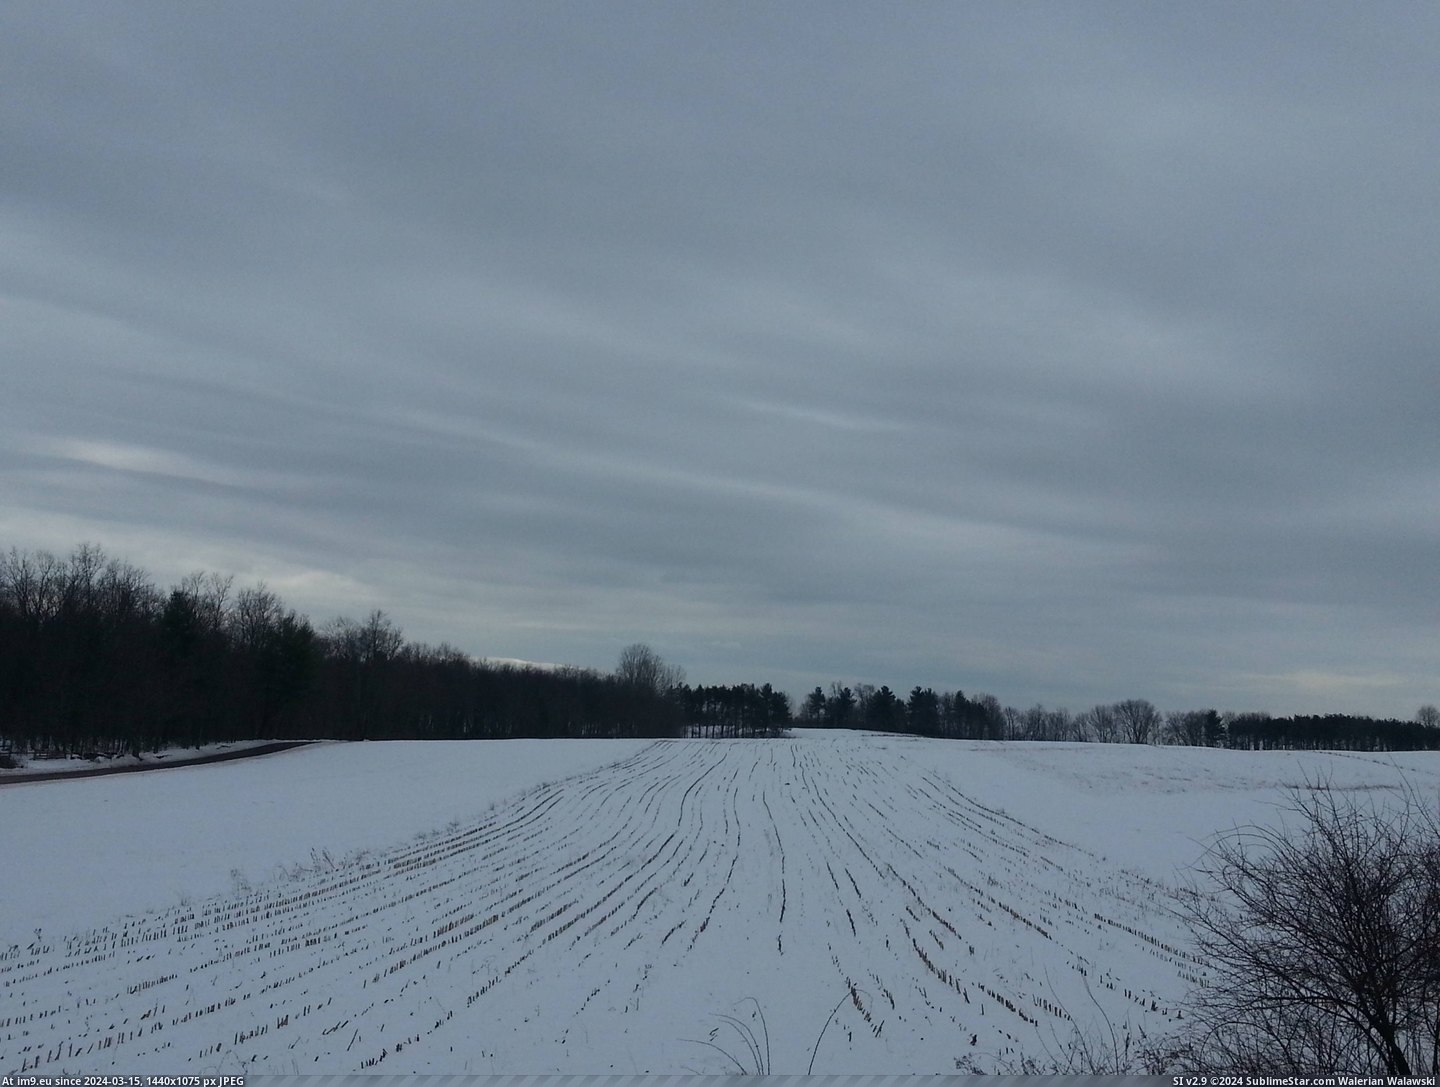 #Year #Not #Sub #Recess #Cornfield #Shickshinny #Pennsylvania #Overly #Dramatic [Earthporn] A cornfield in Shickshinny, Pennsylvania, taking a recess until next year. Not overly dramatic, there is still a sub Pic. (Image of album My r/EARTHPORN favs))